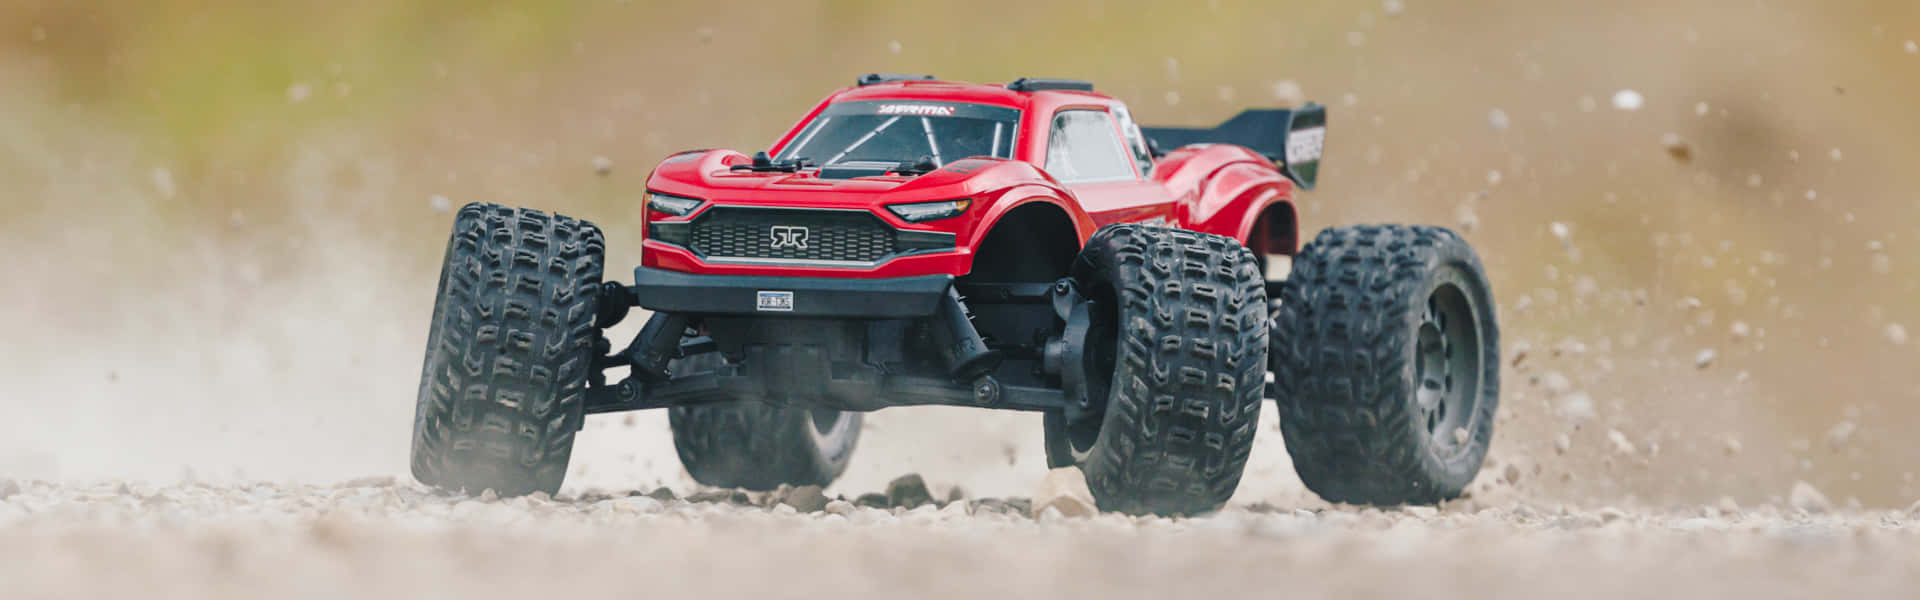 A Red Remote Control Truck Is Driving On A Dirt Road